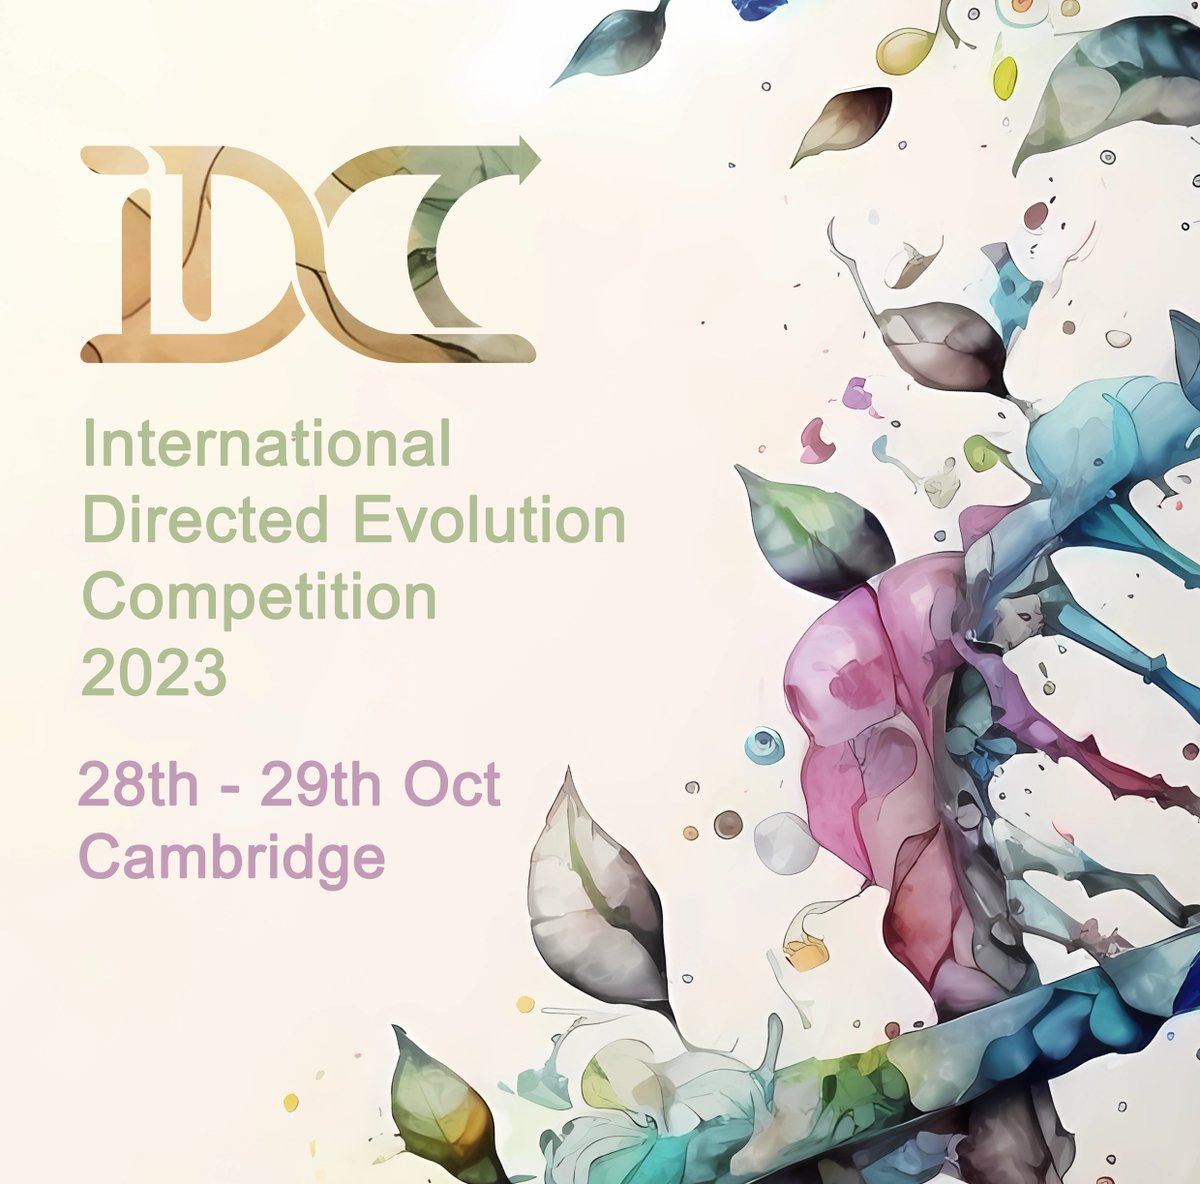 iDEC 2023 is set to take place at Fitzwilliam College, University of Cambridge, on October 28-29. Join us as 15 student teams worldwide share their research on Directed Evolution. Stay tuned for more updates! 🌍📷 #iDEC2023 #DirectedEvolution